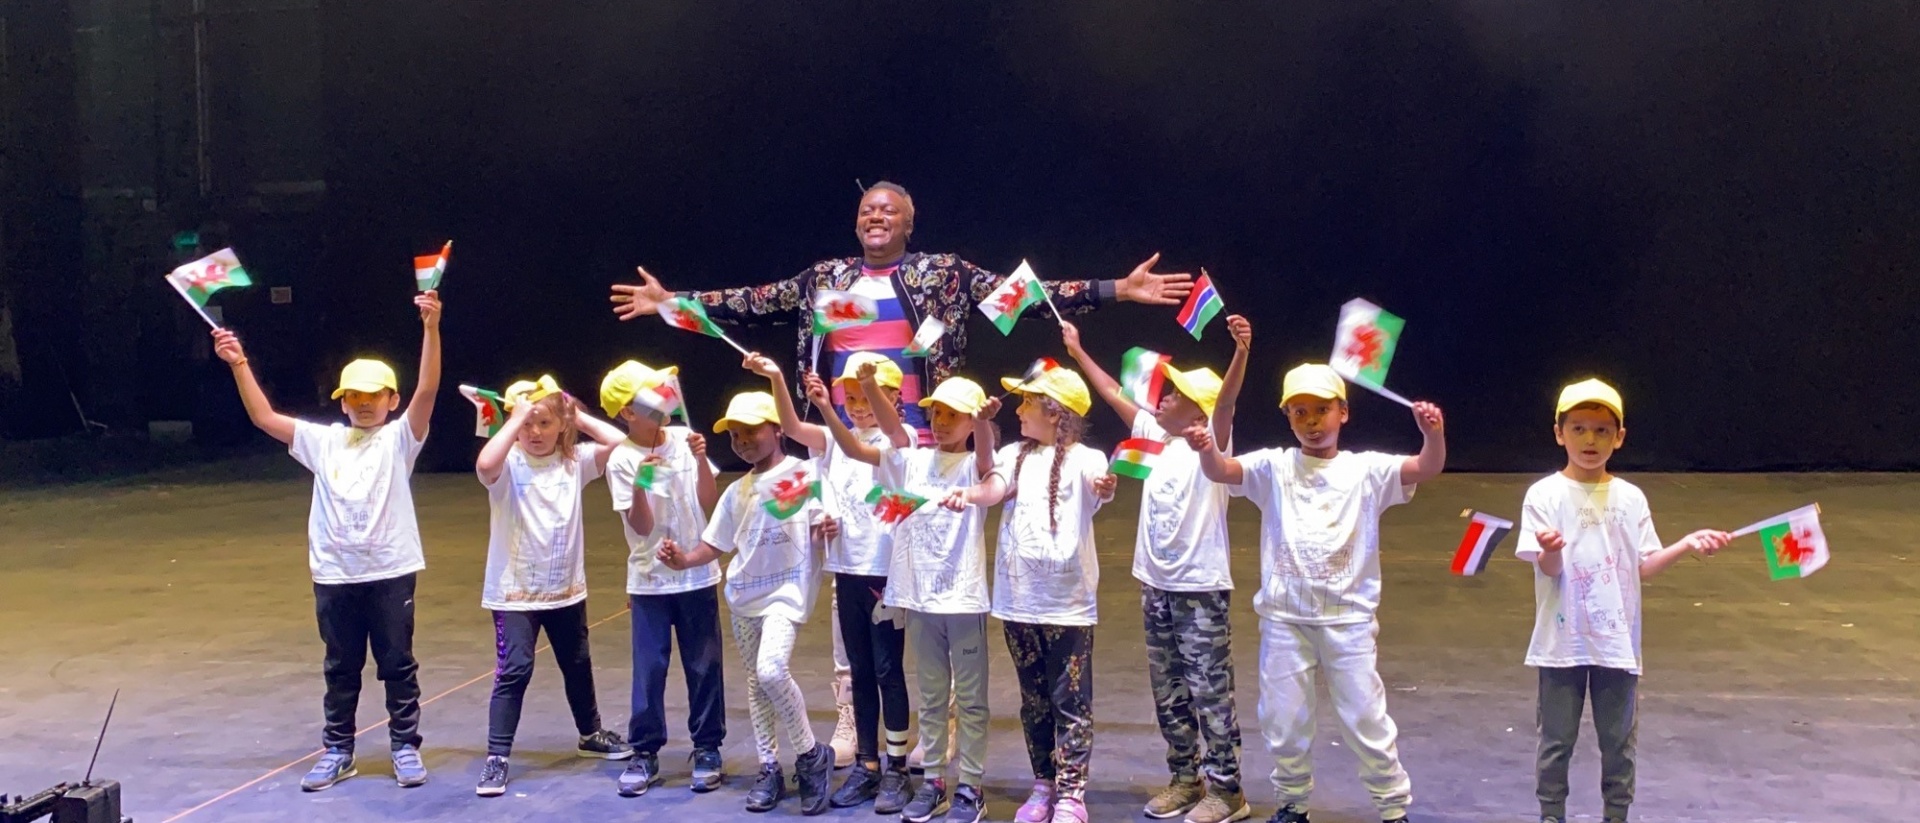 Pupils waving flags on the stage of the Millennium Centre